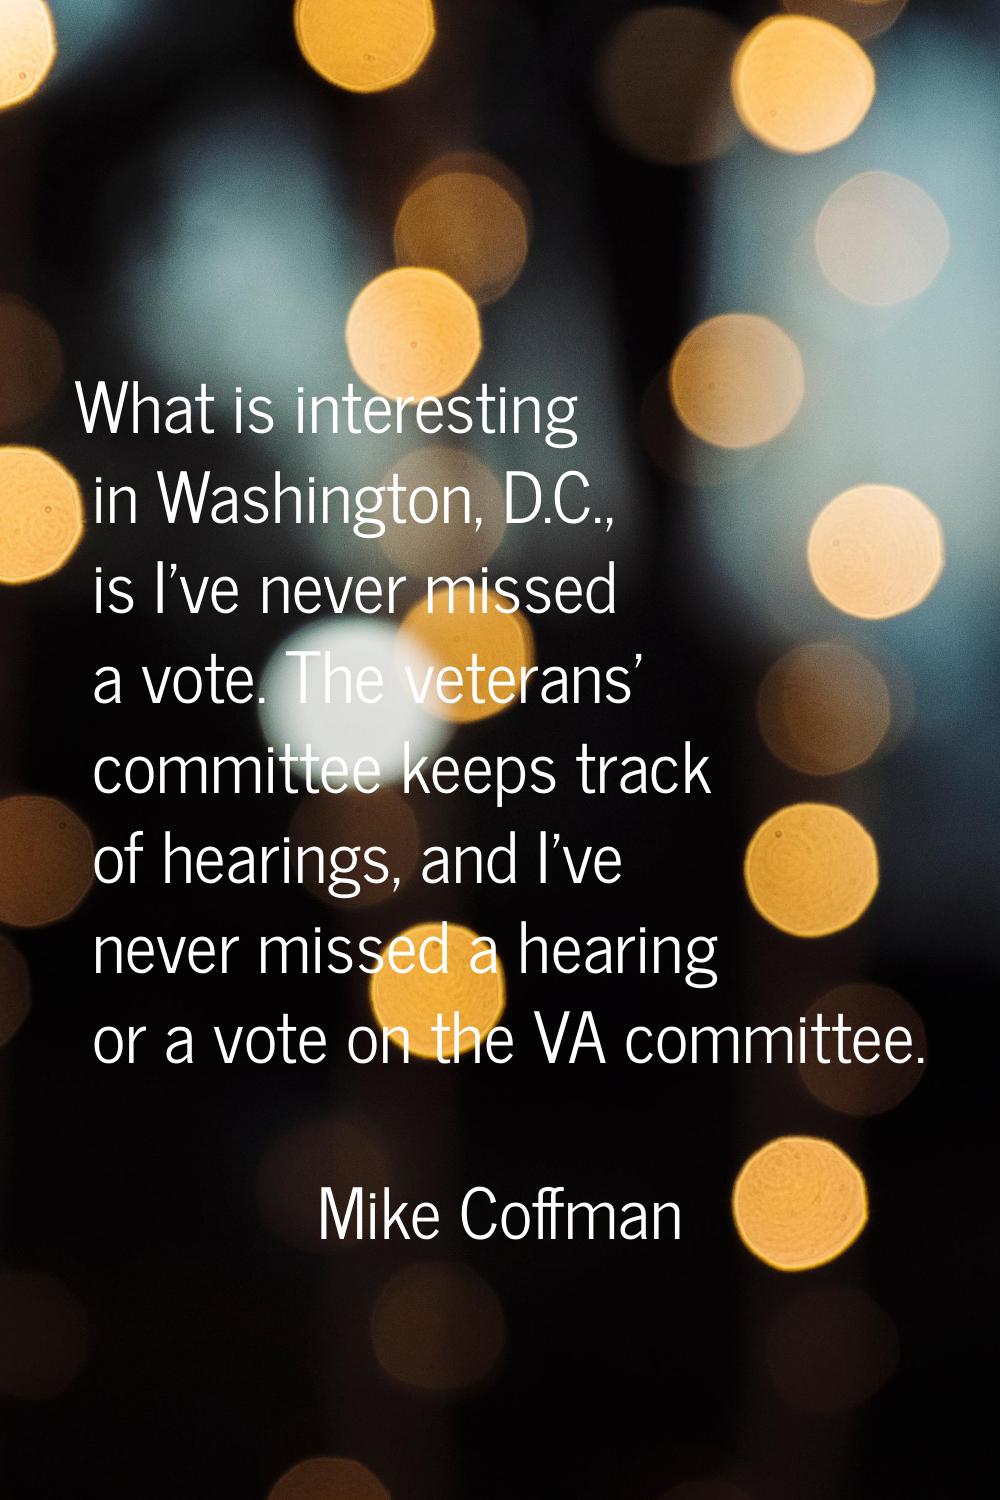 What is interesting in Washington, D.C., is I've never missed a vote. The veterans' committee keeps